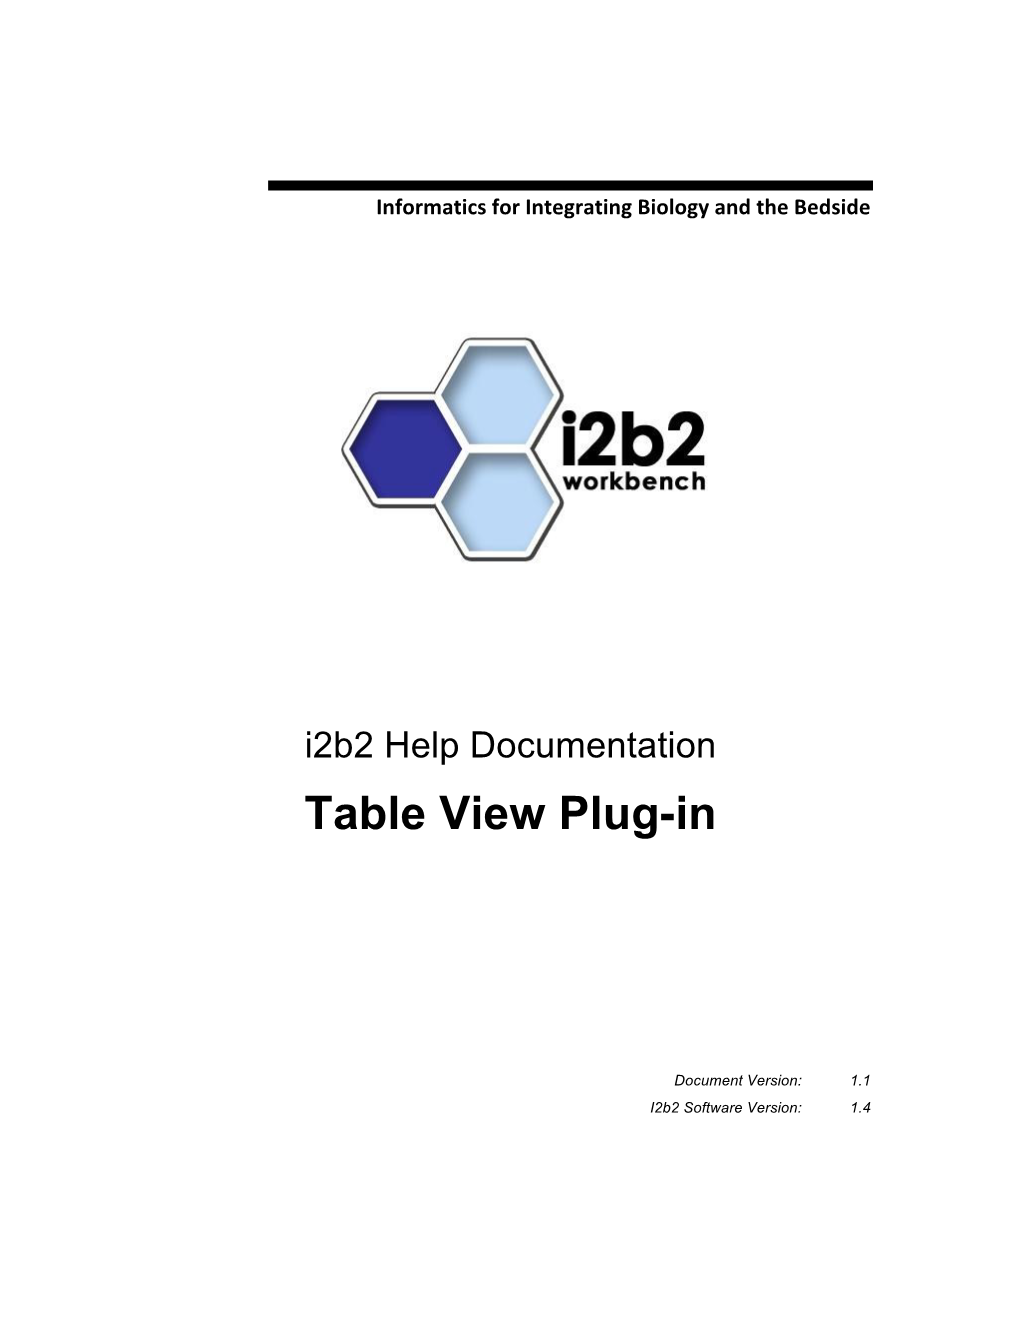 Table View Plug-In Help Guide